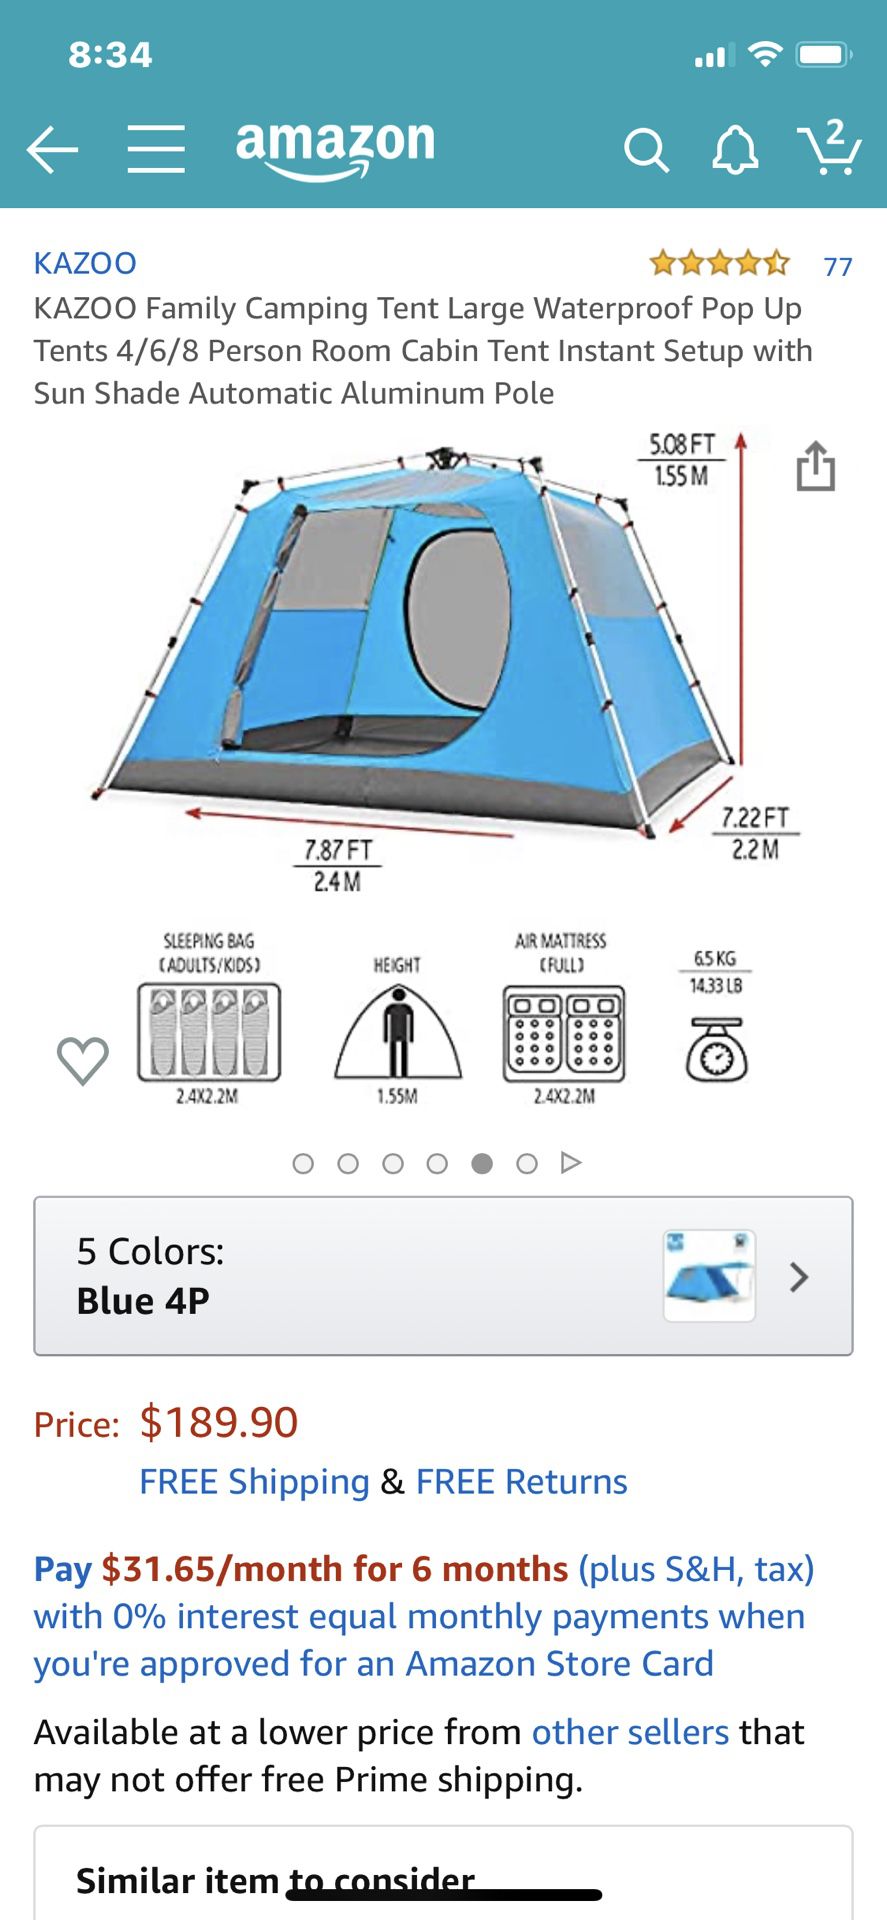 KAZOO Family Camping Tent Large Waterproof Pop Up Tents 4/6/8 Person Room Cabin Tent Instant Setup with Sun Shade